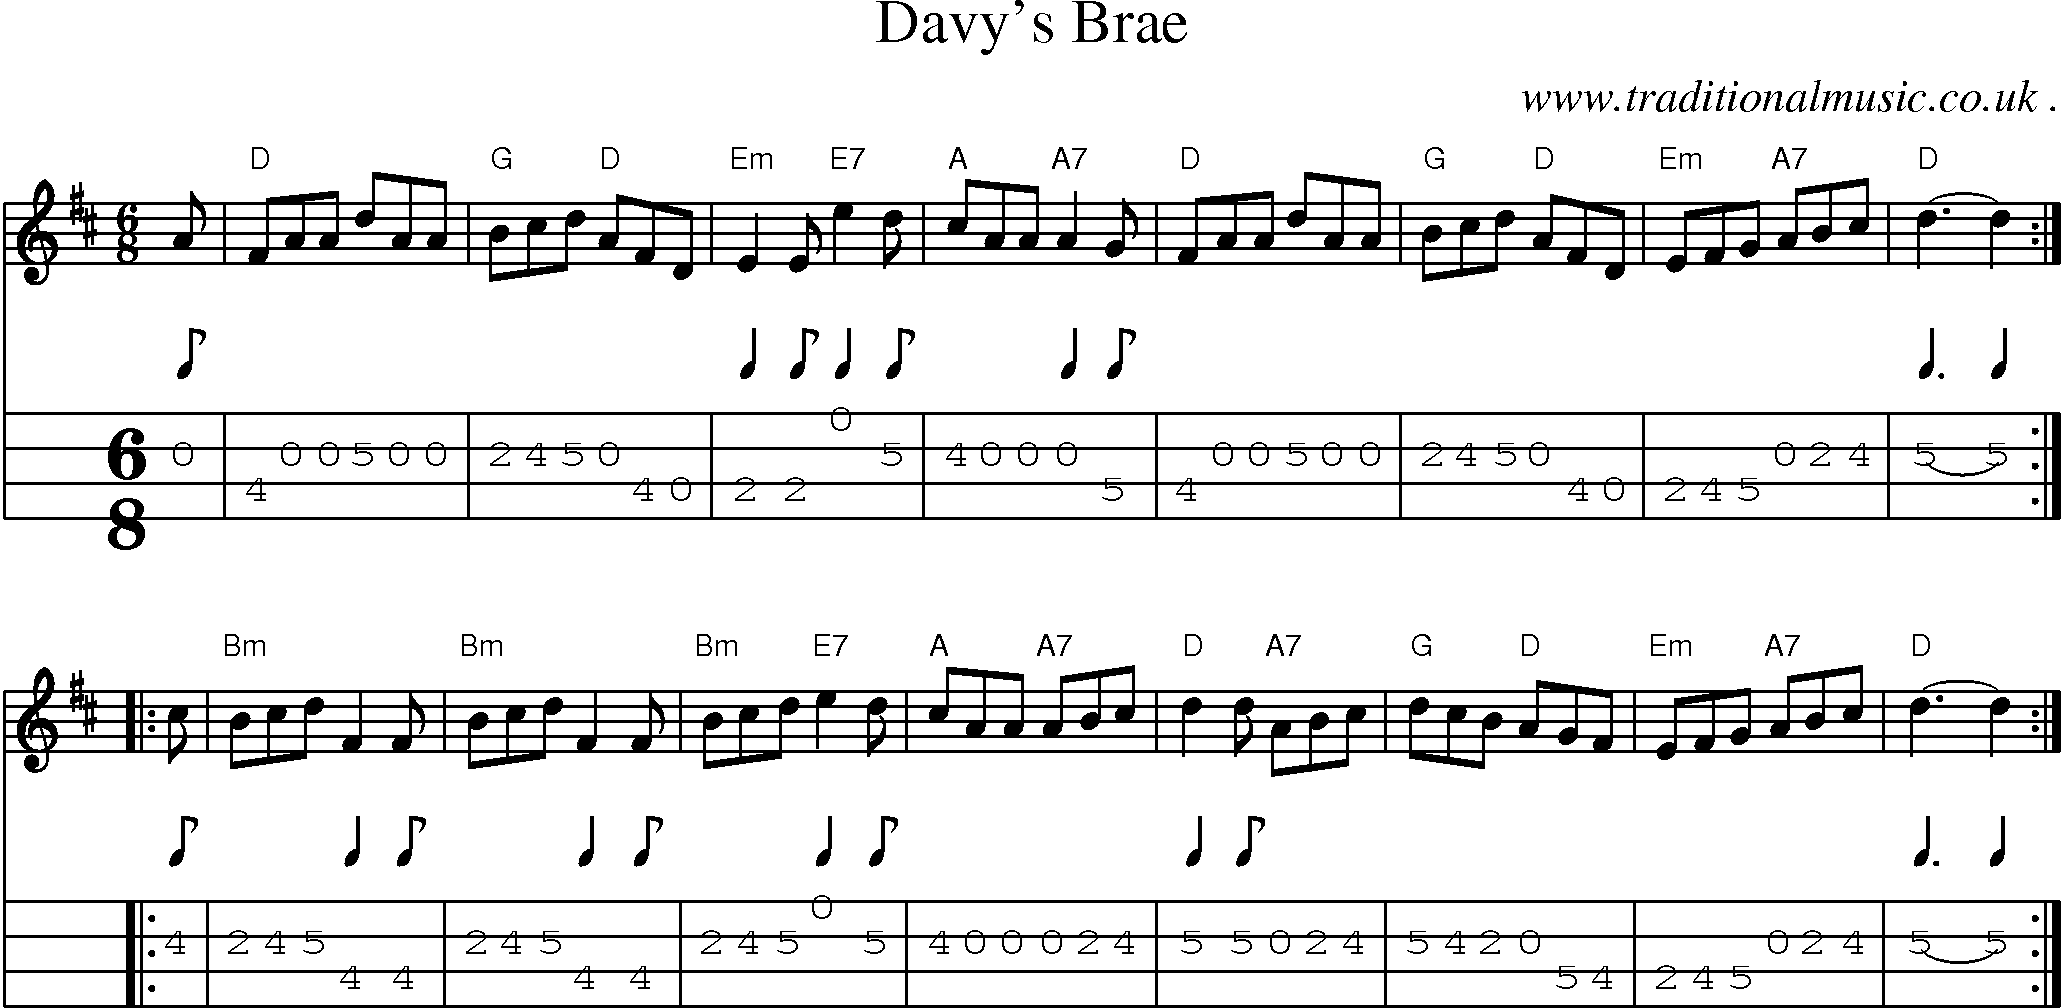 Sheet-music  score, Chords and Mandolin Tabs for Davys Brae